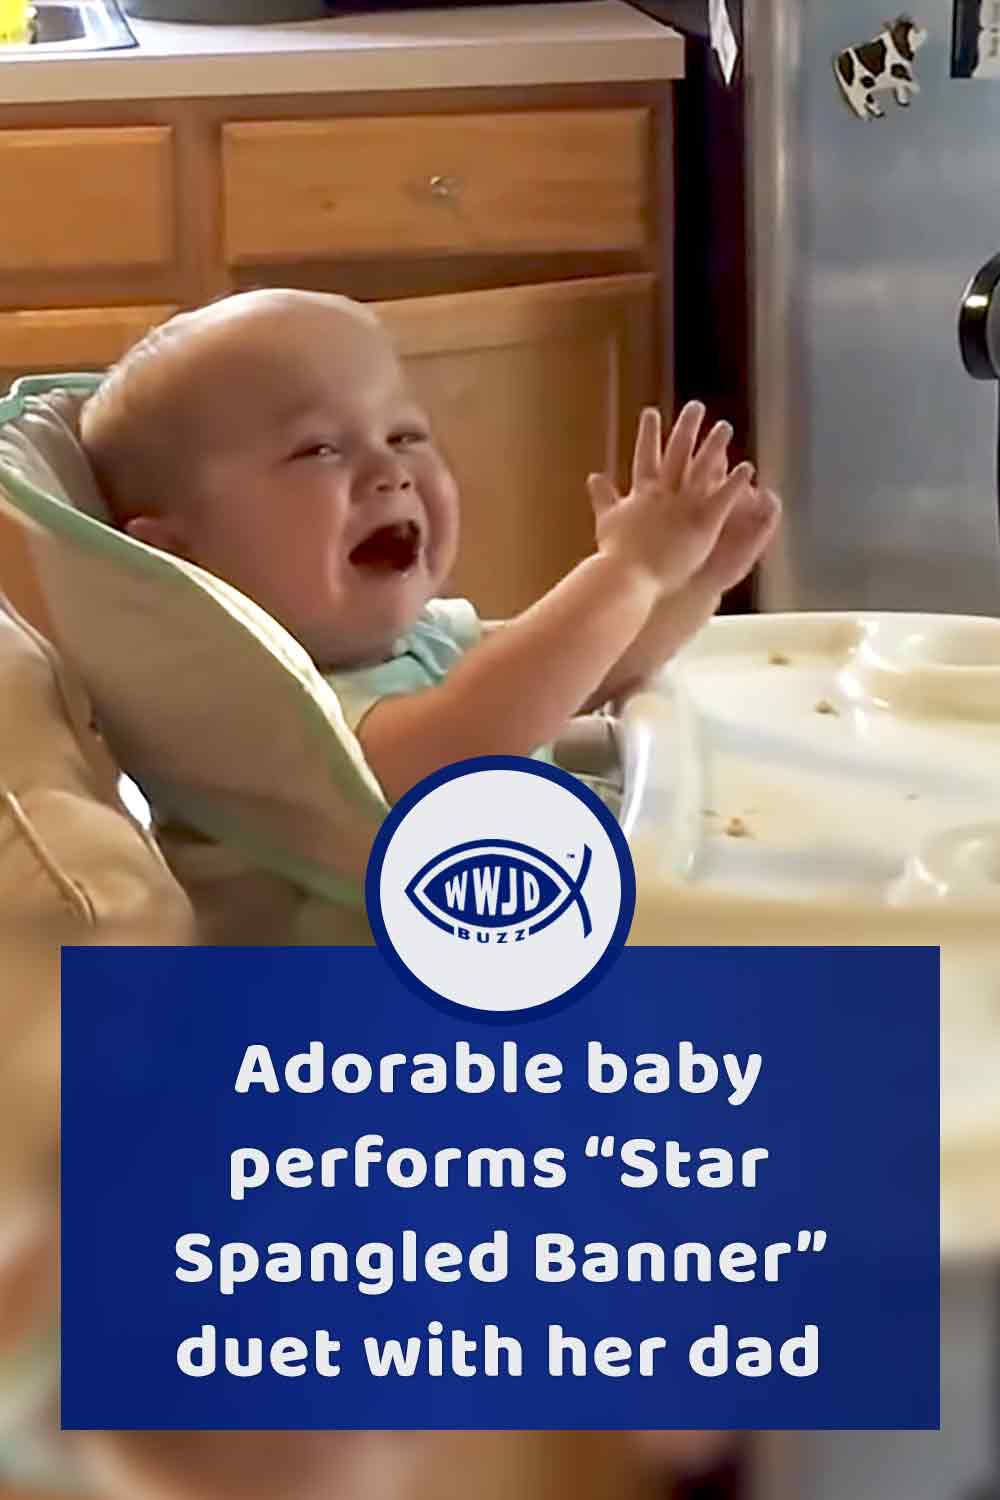 Adorable baby performs “Star Spangled Banner” duet with her dad